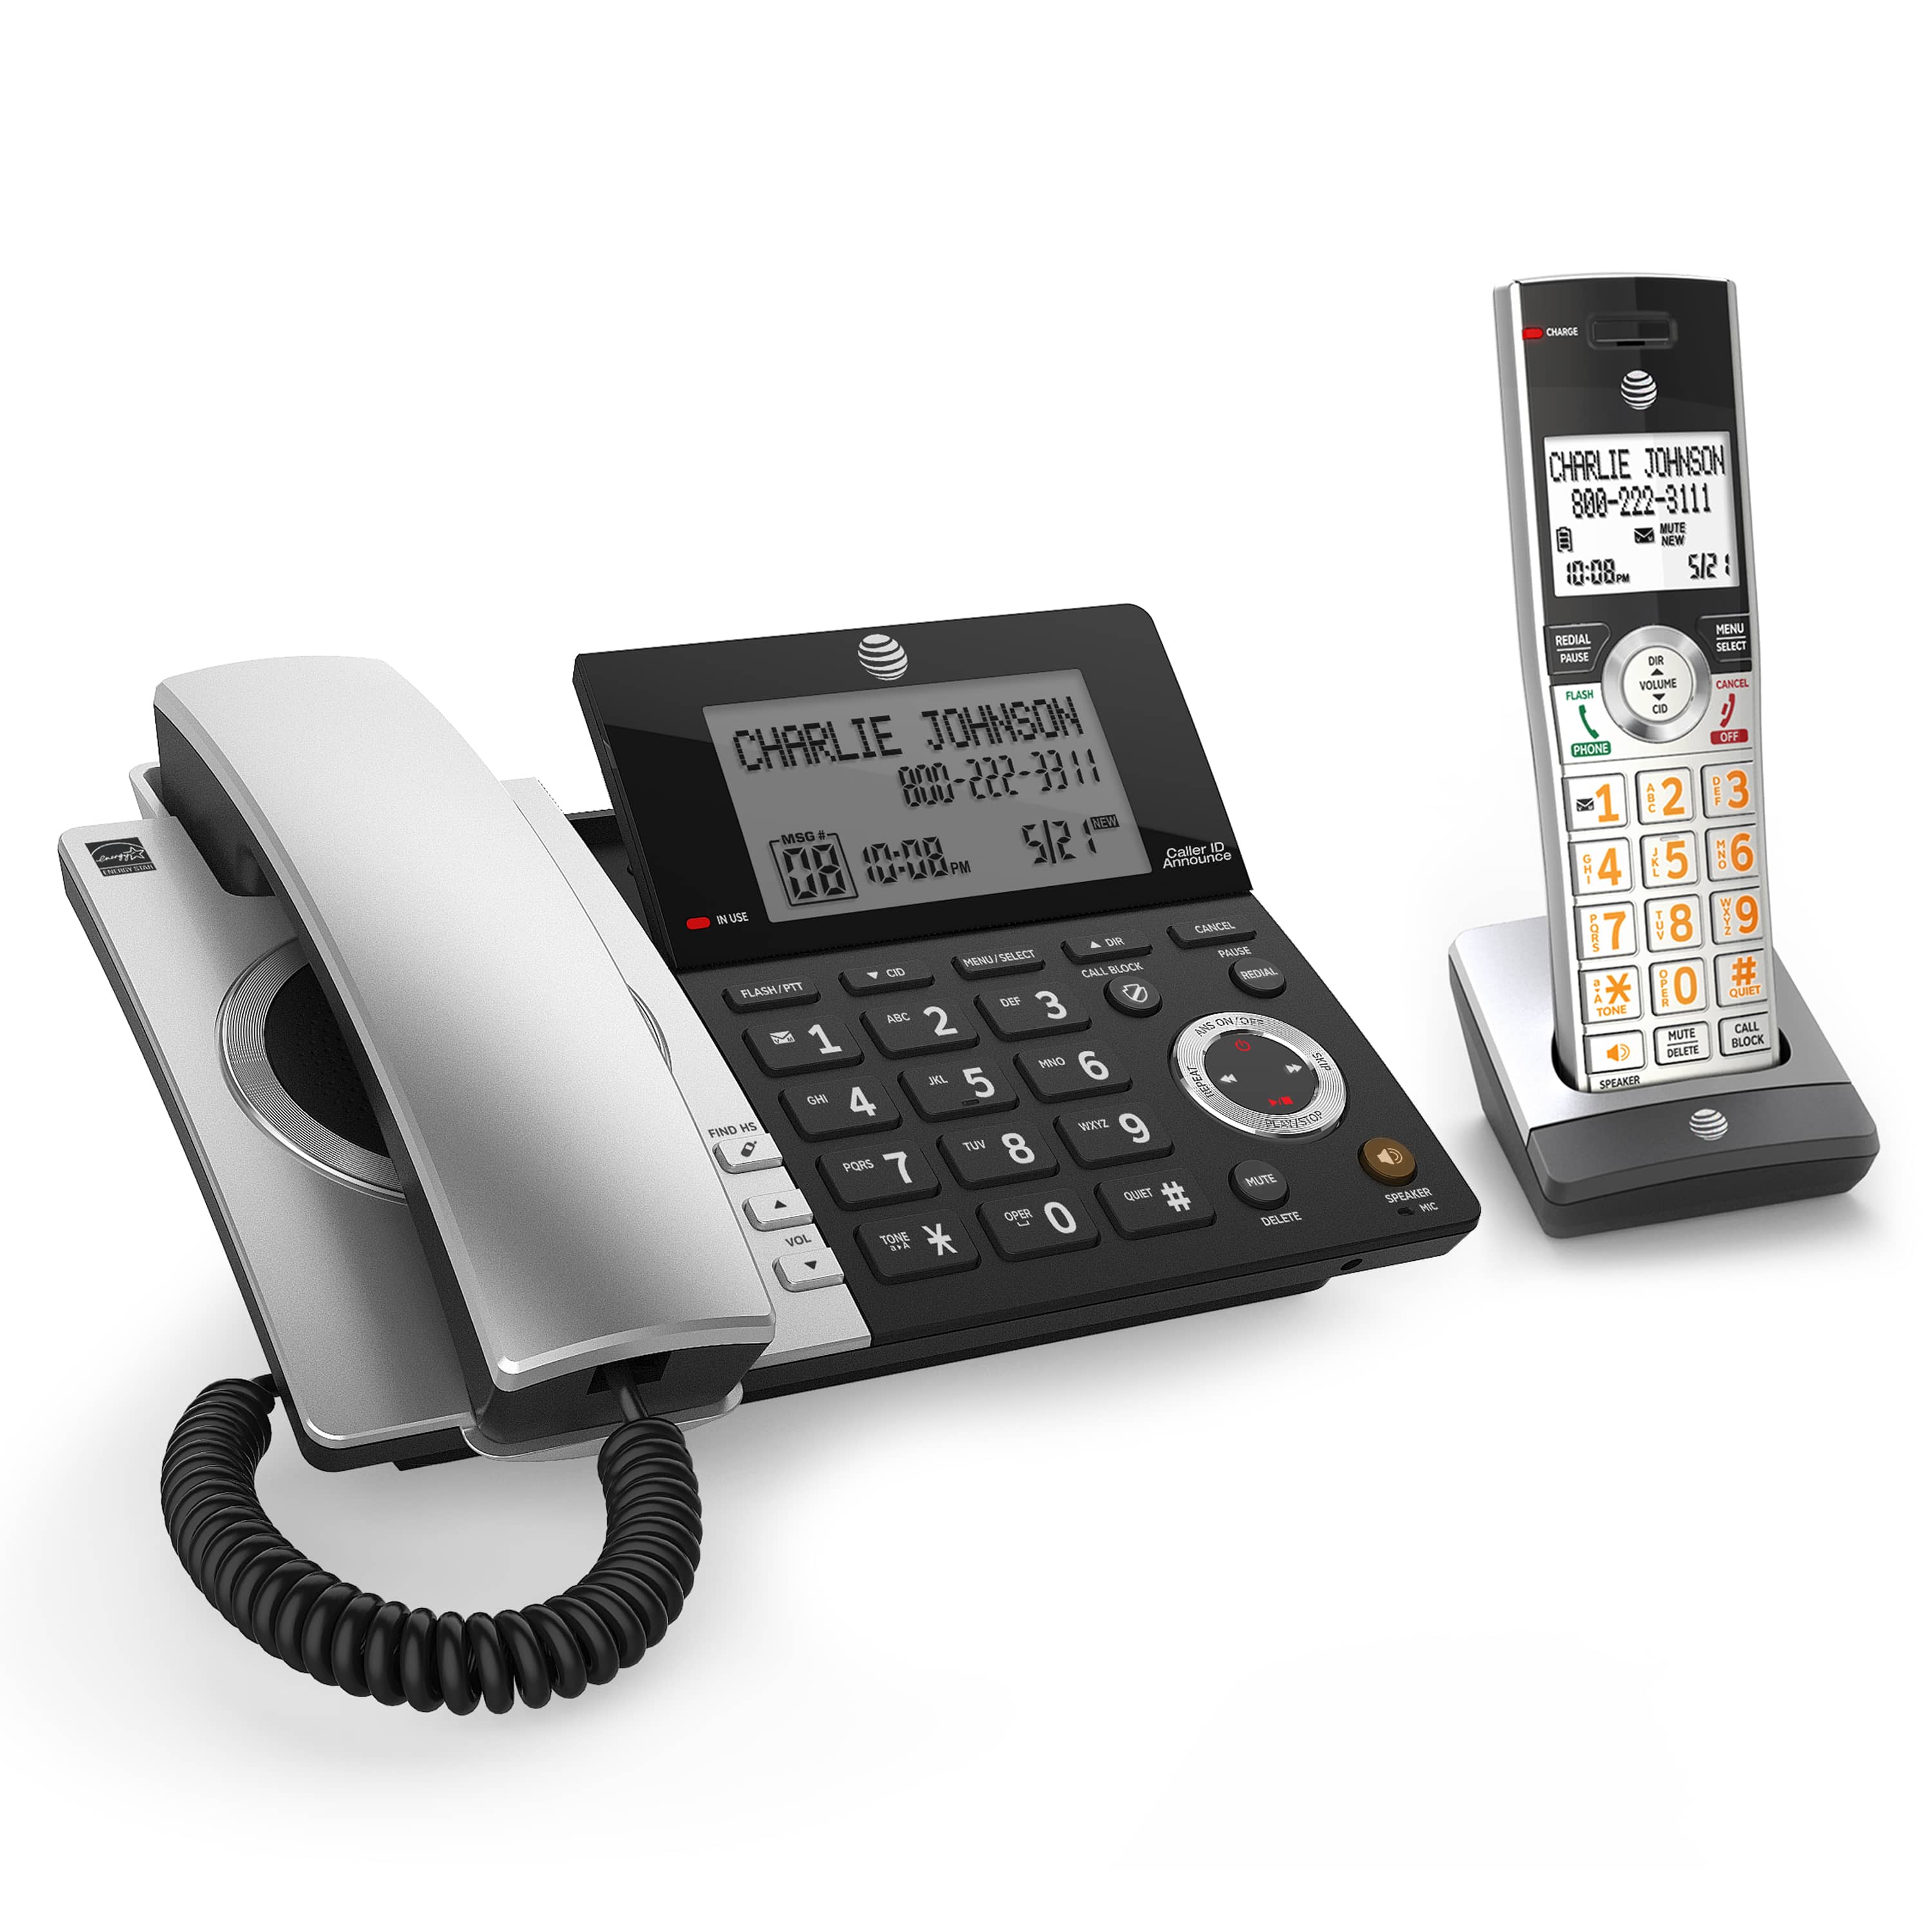 Corded/cordless answering system with smart call blocker - view 3